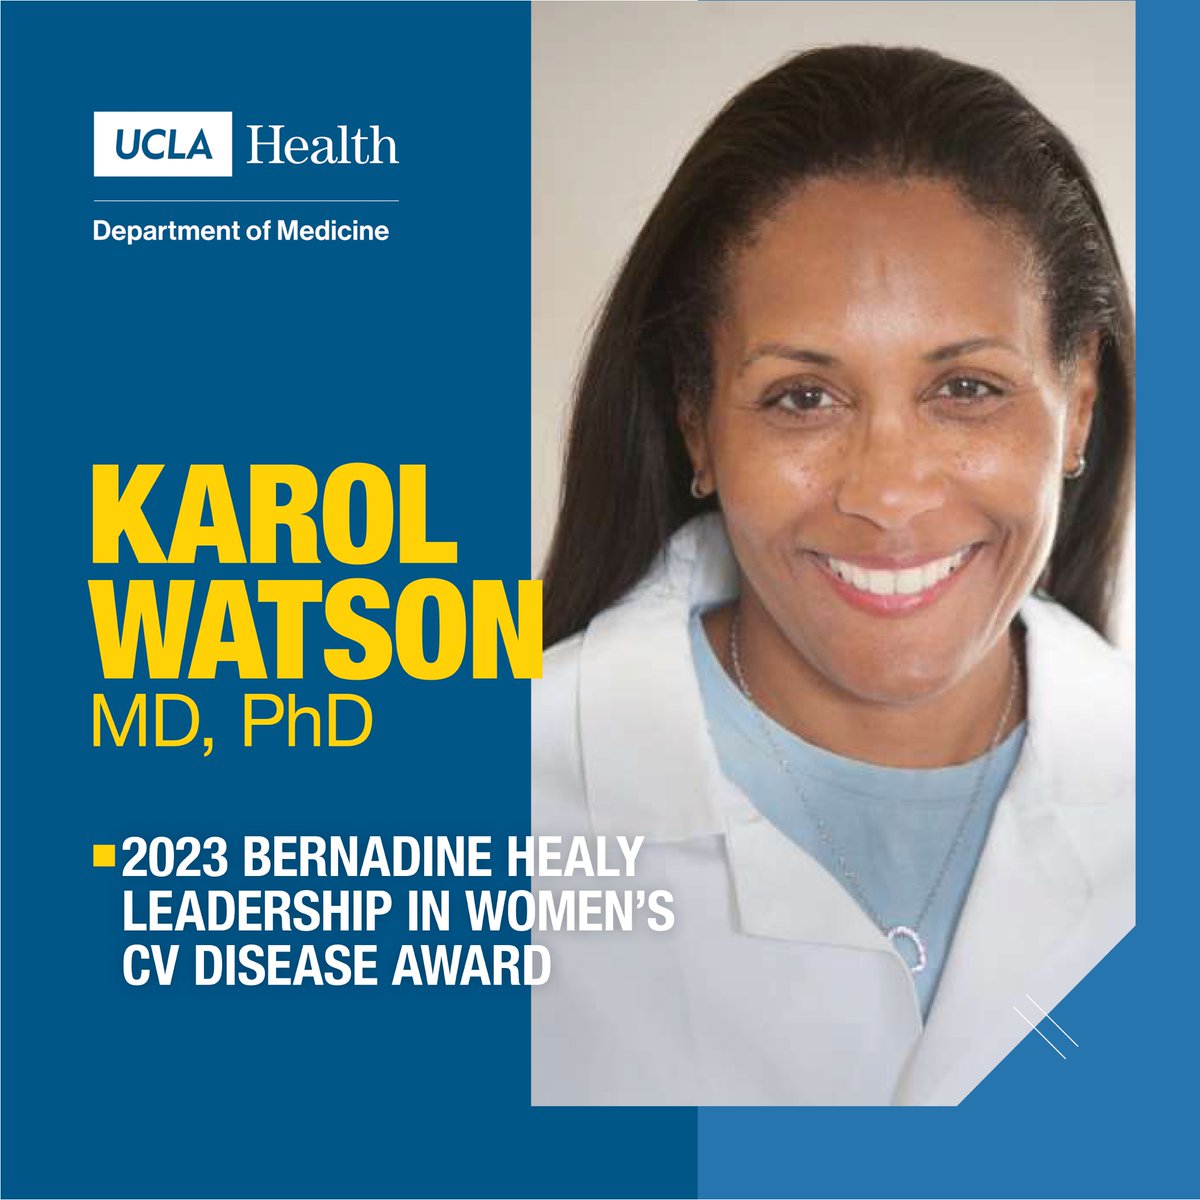 Congratulations to Dr. Karol Watson (@kewatson), awarded the 2023 @ACCinTouch Bernadine Healy Leadership Award in recognition of her commitment to patient care, research, education, and advancing our understanding of women's cardiovascular disease!